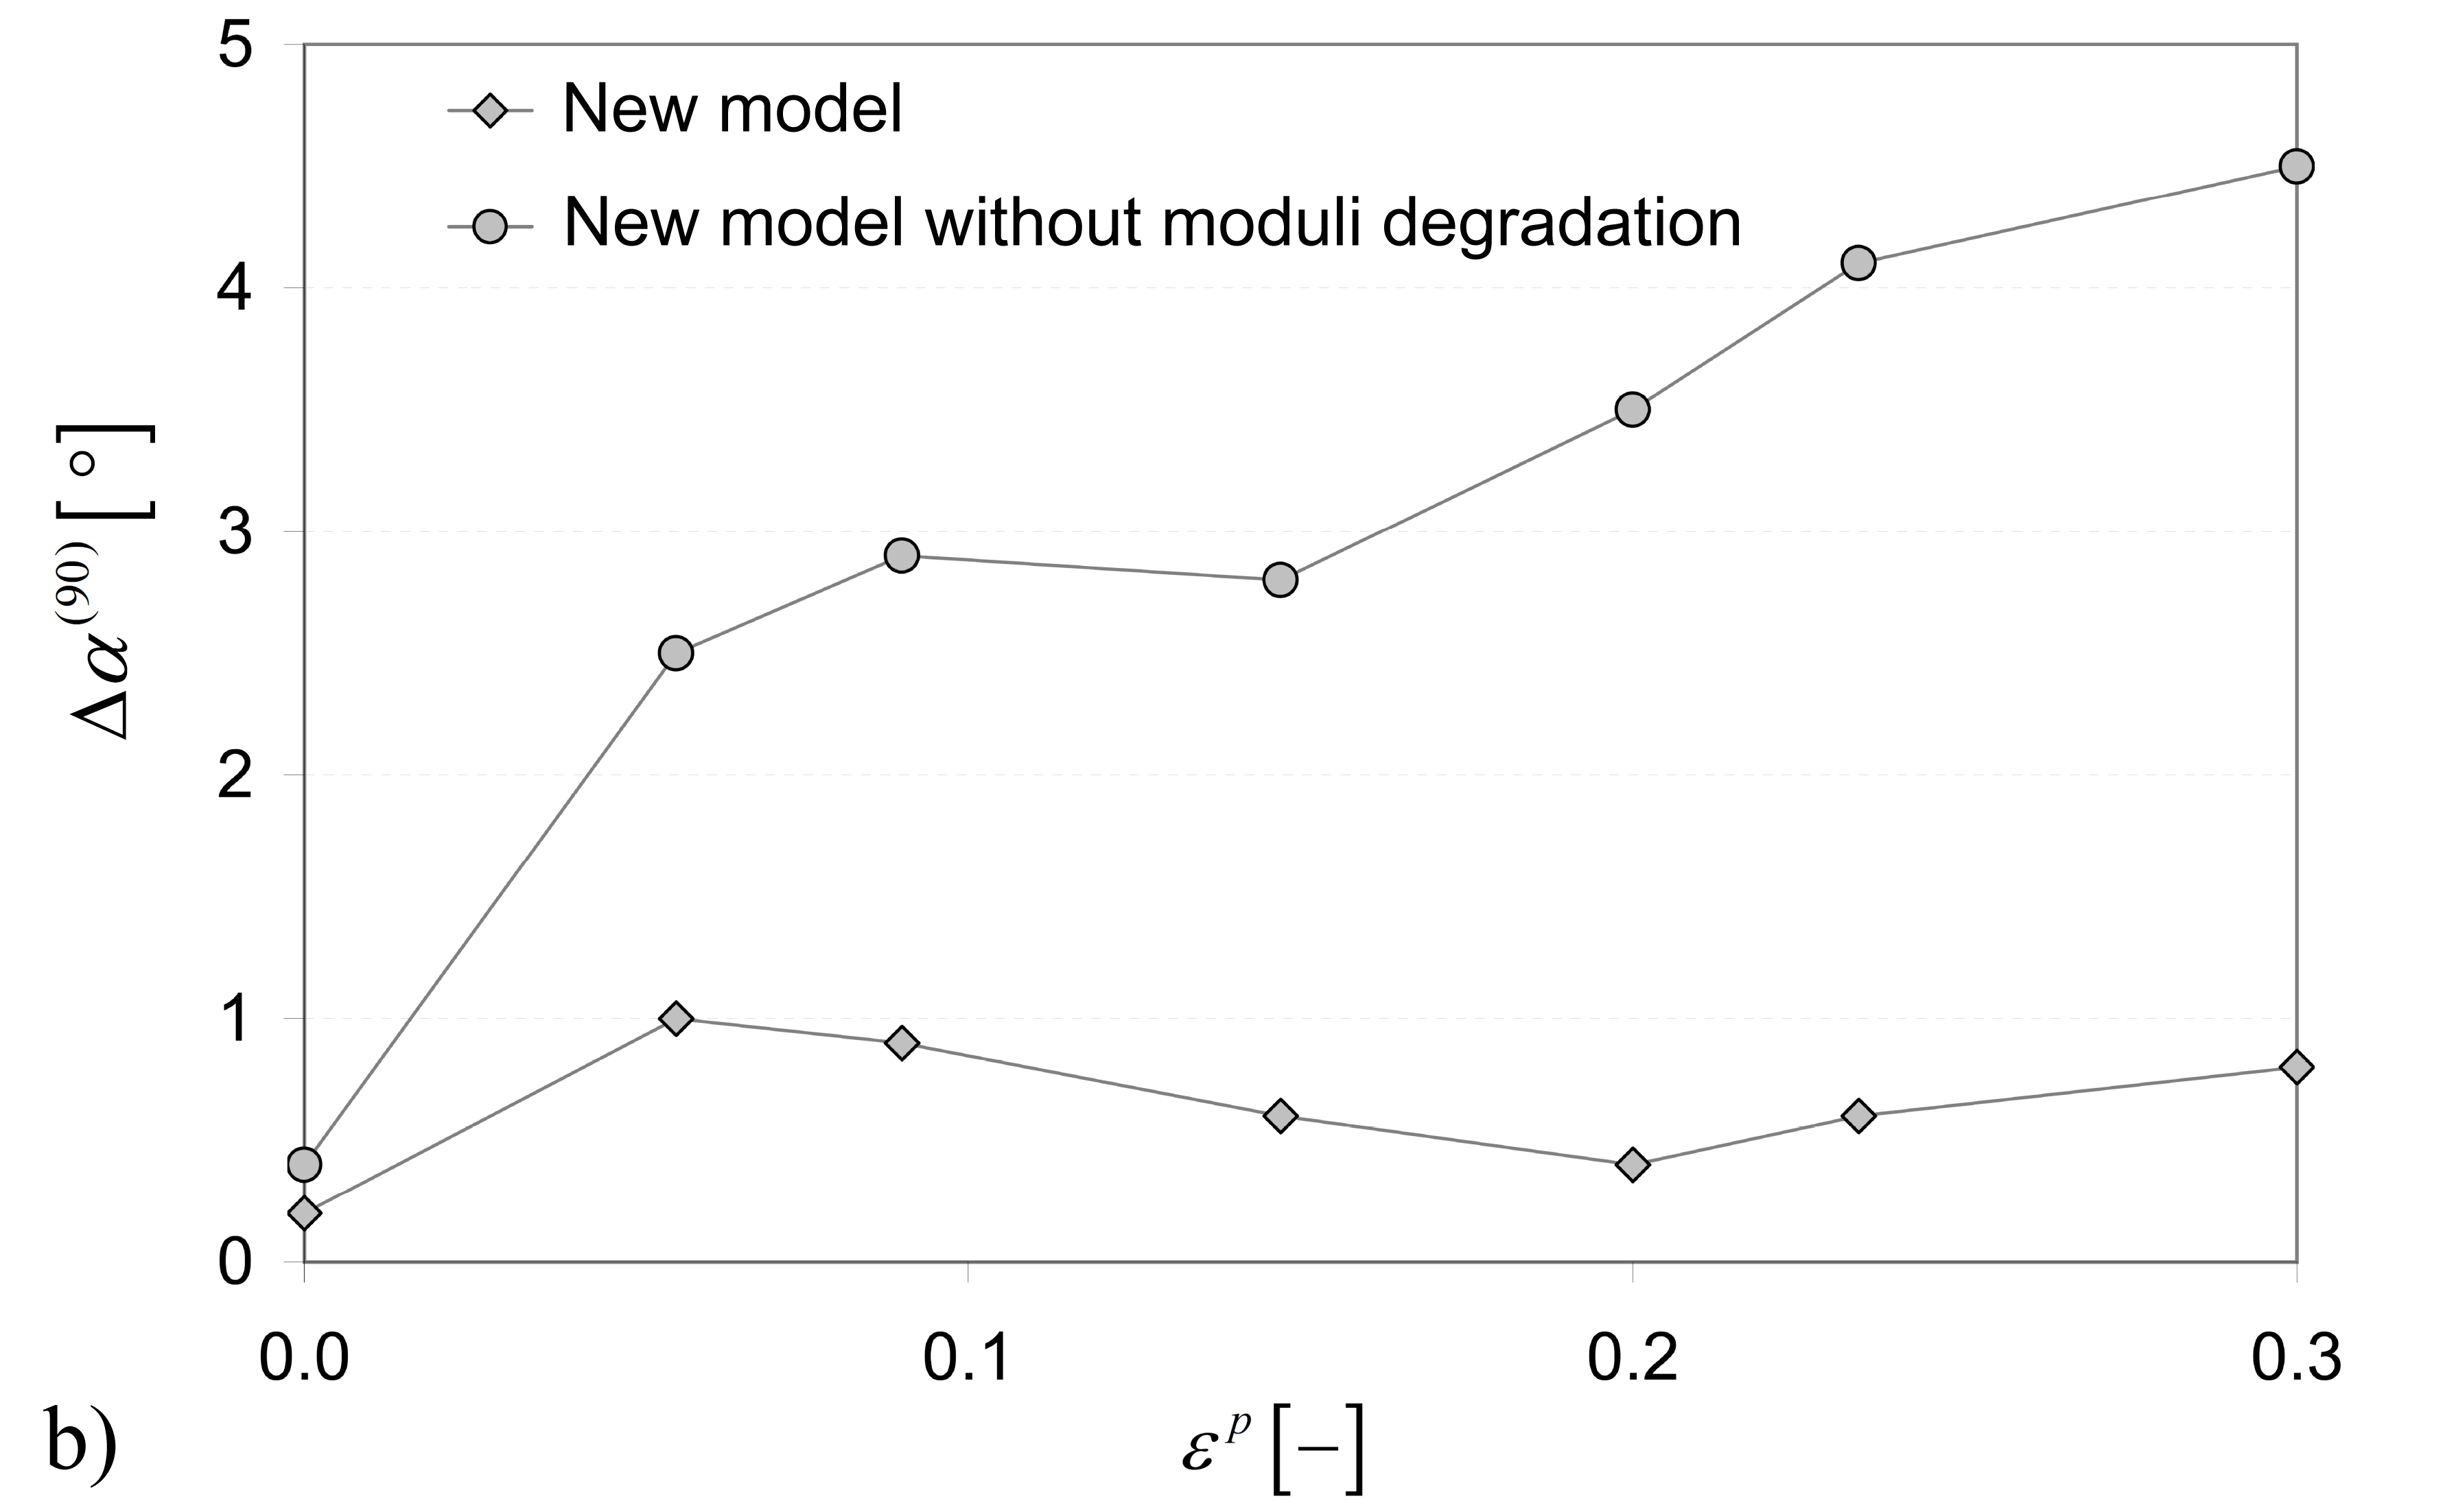 Errors in model predictions - perpendicular to rolling direction